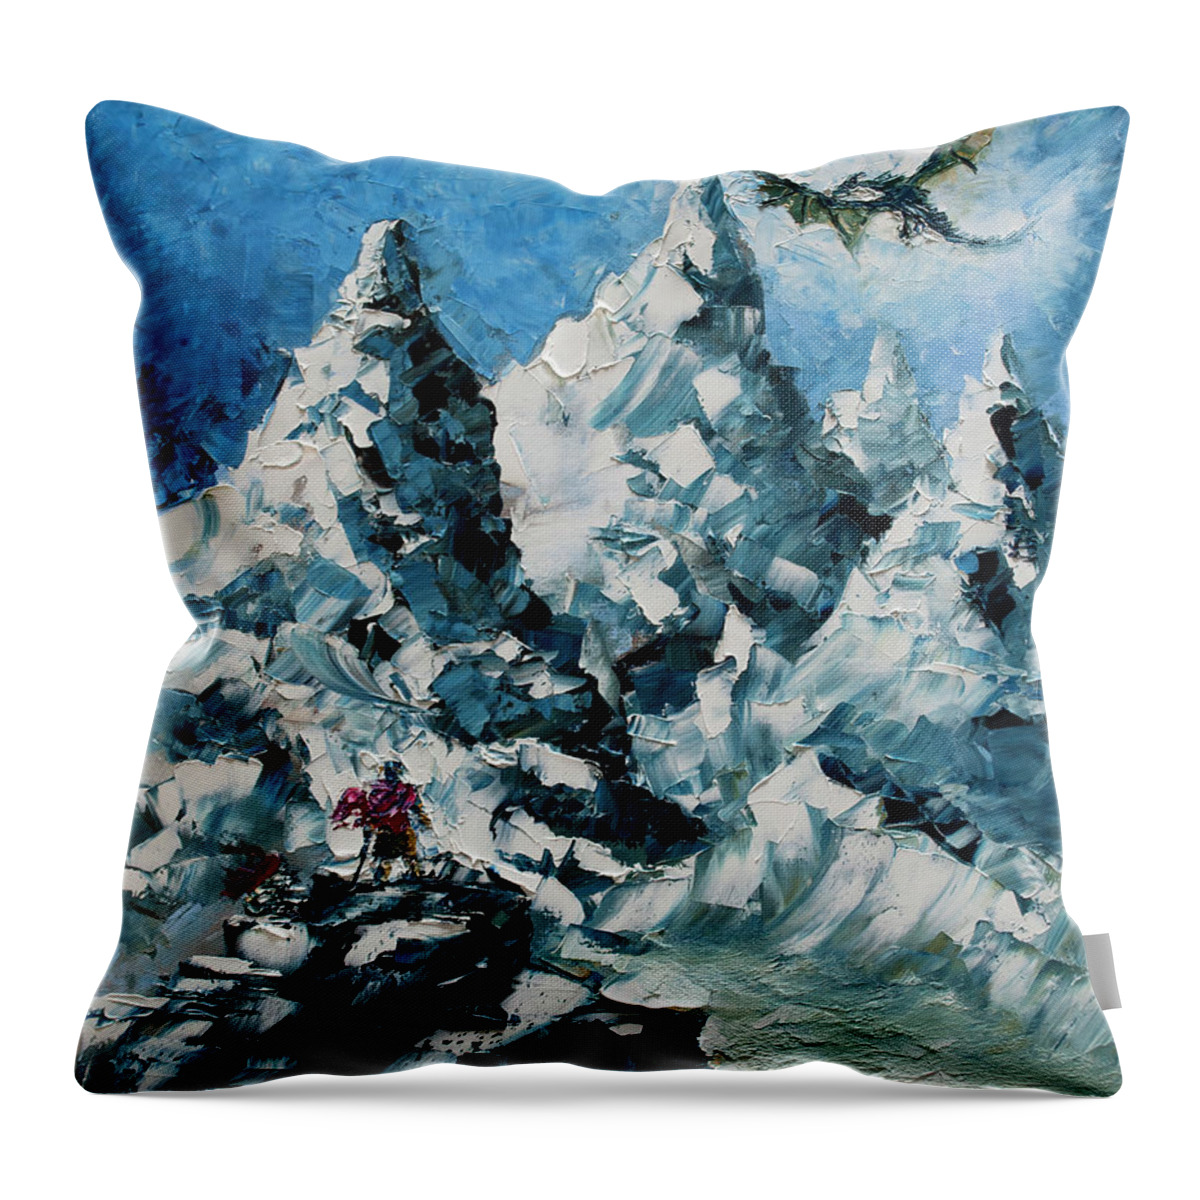 Skyrim Art Throw Pillow featuring the painting Skyrim - A Meeting of Souls by Nelson Ruger